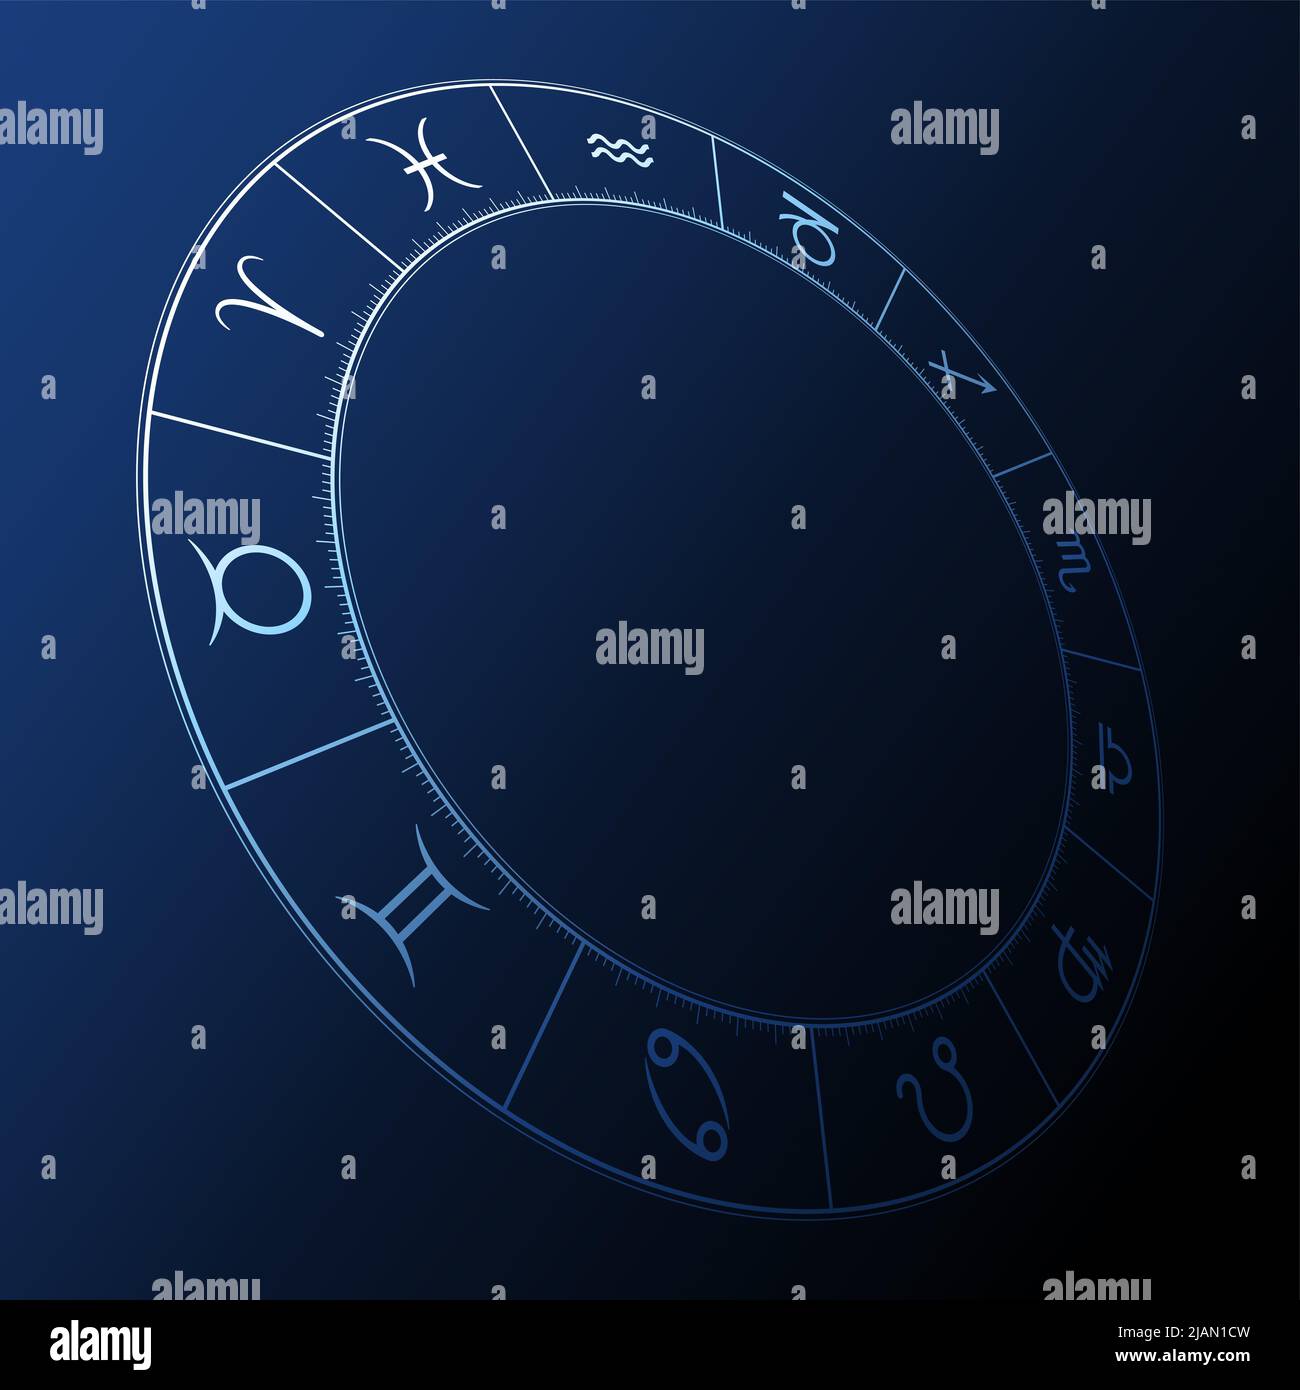 Zodiac circle on a dark blue background. Three dimensional astrological chart, showing the twelve star sign symbols. Wheel of the zodiac. Stock Photo